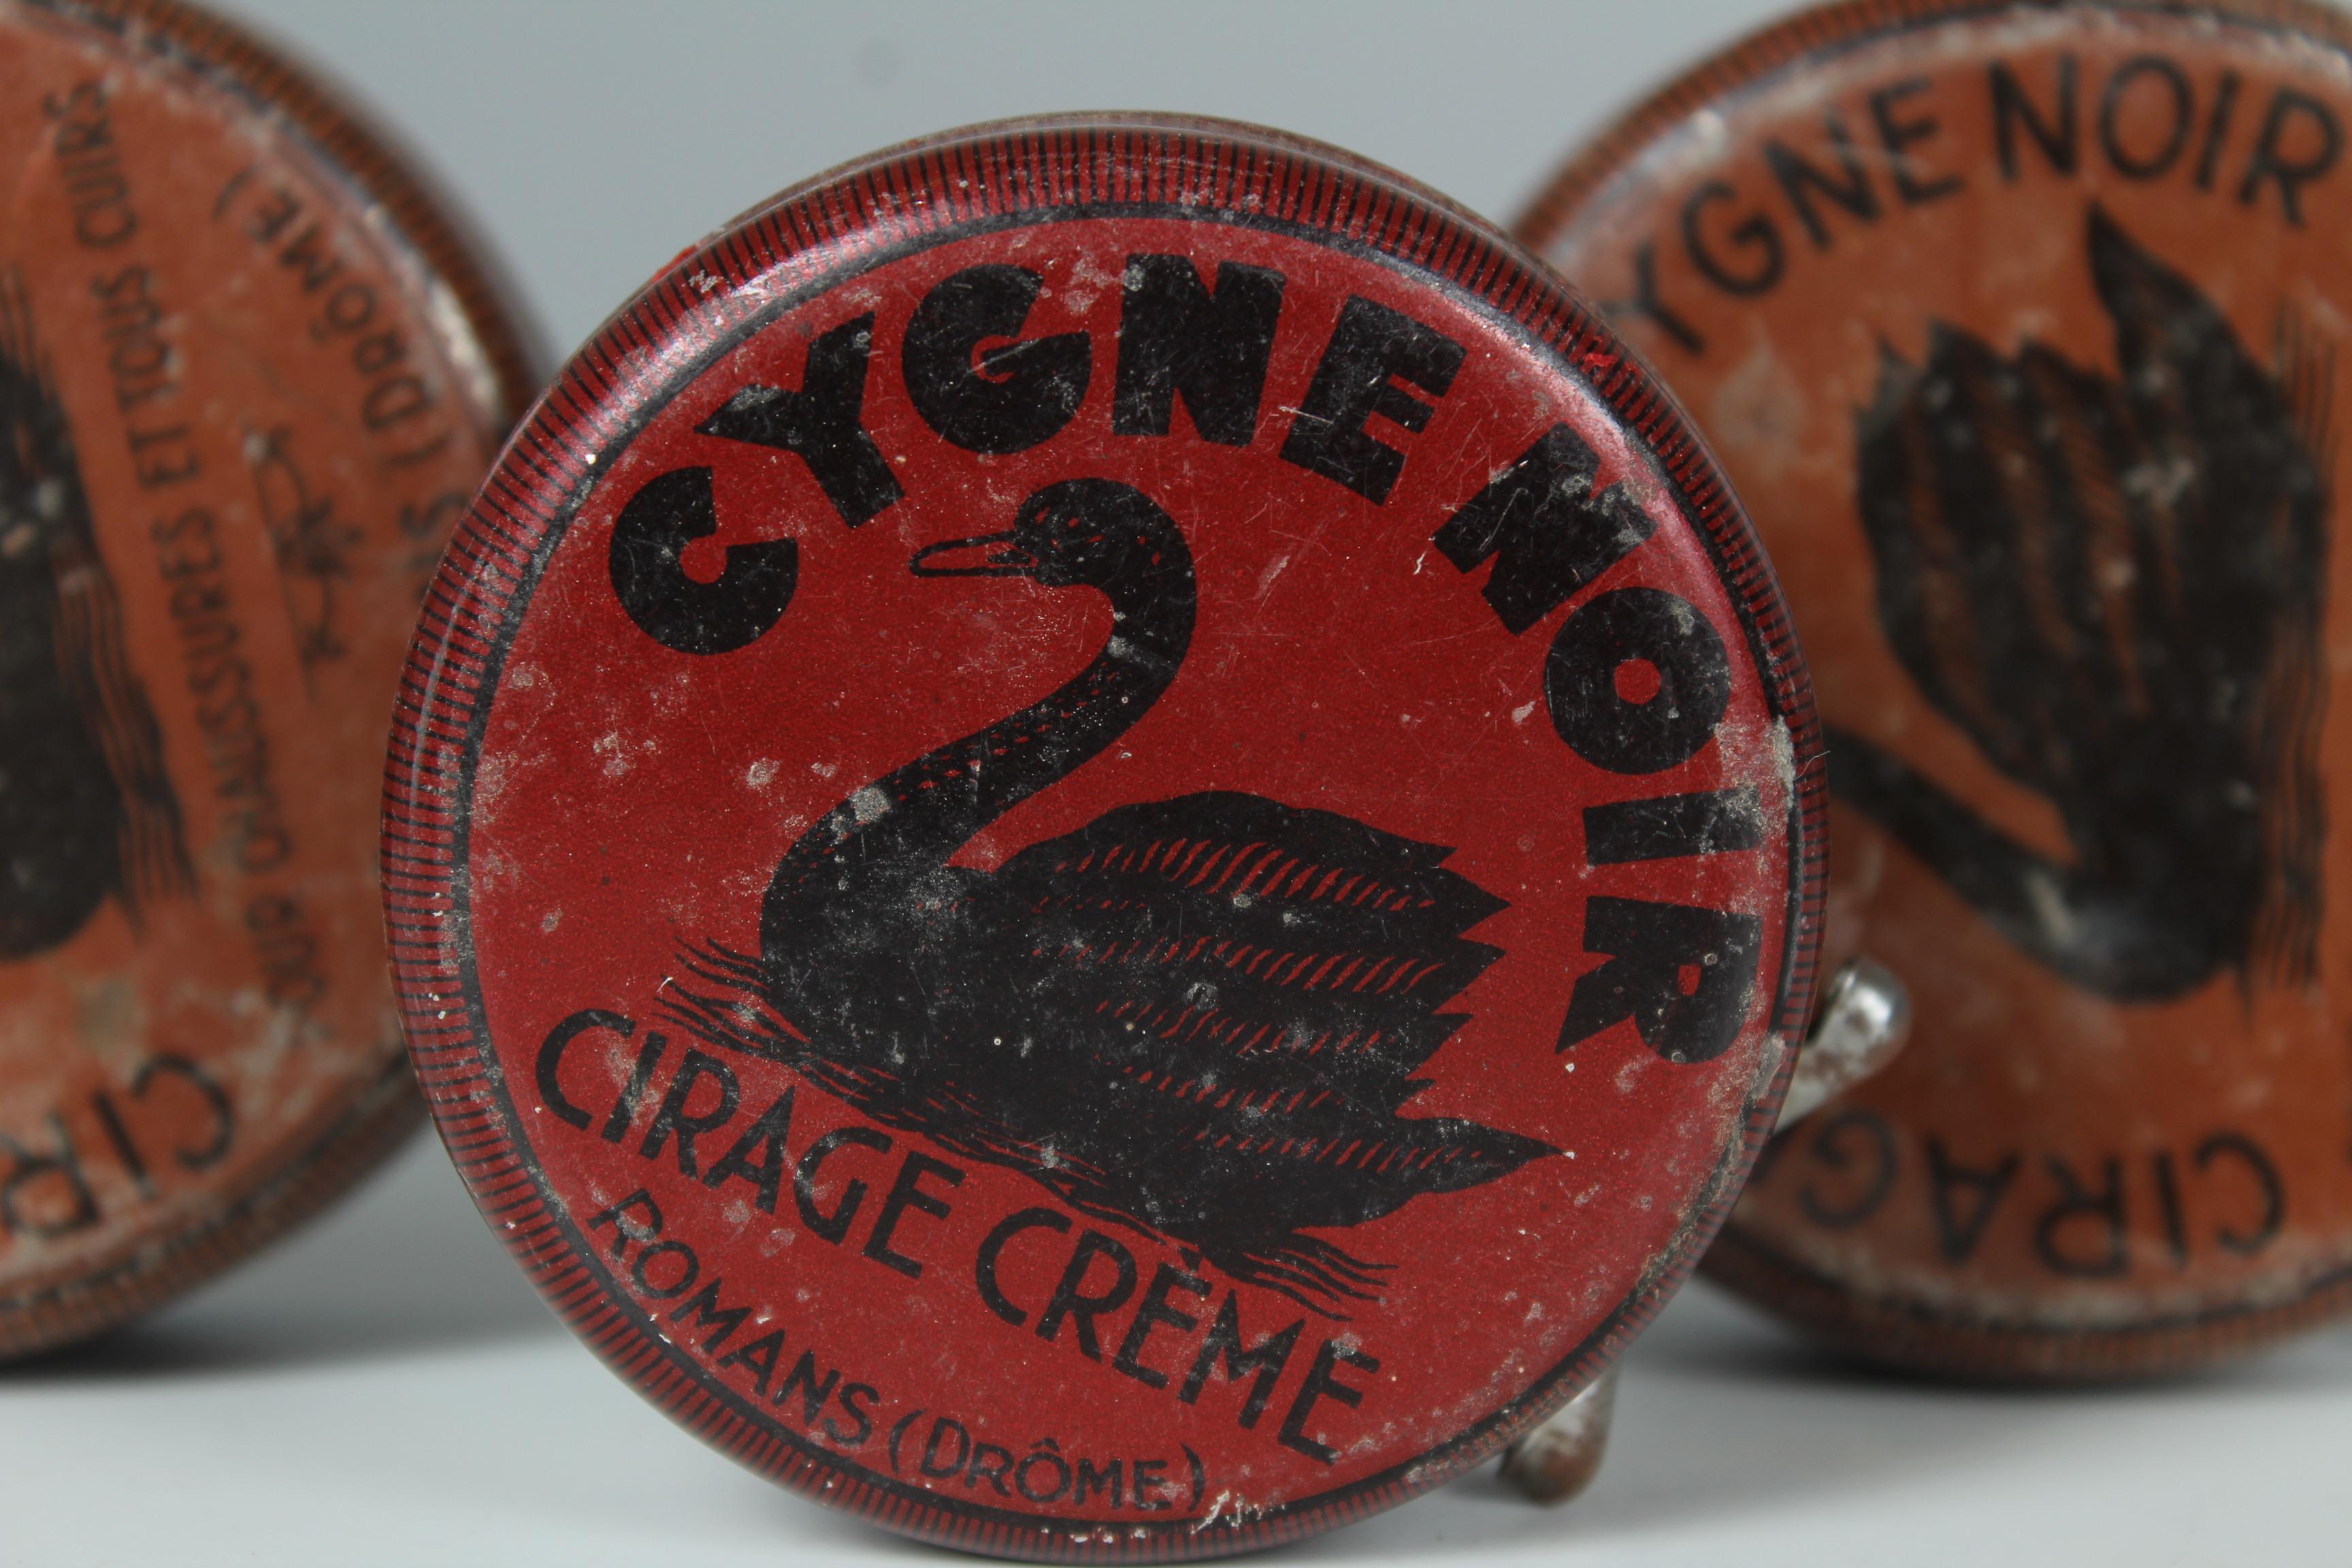 Set of 3 antique tin cans with shoe polish by Cygne noir.
